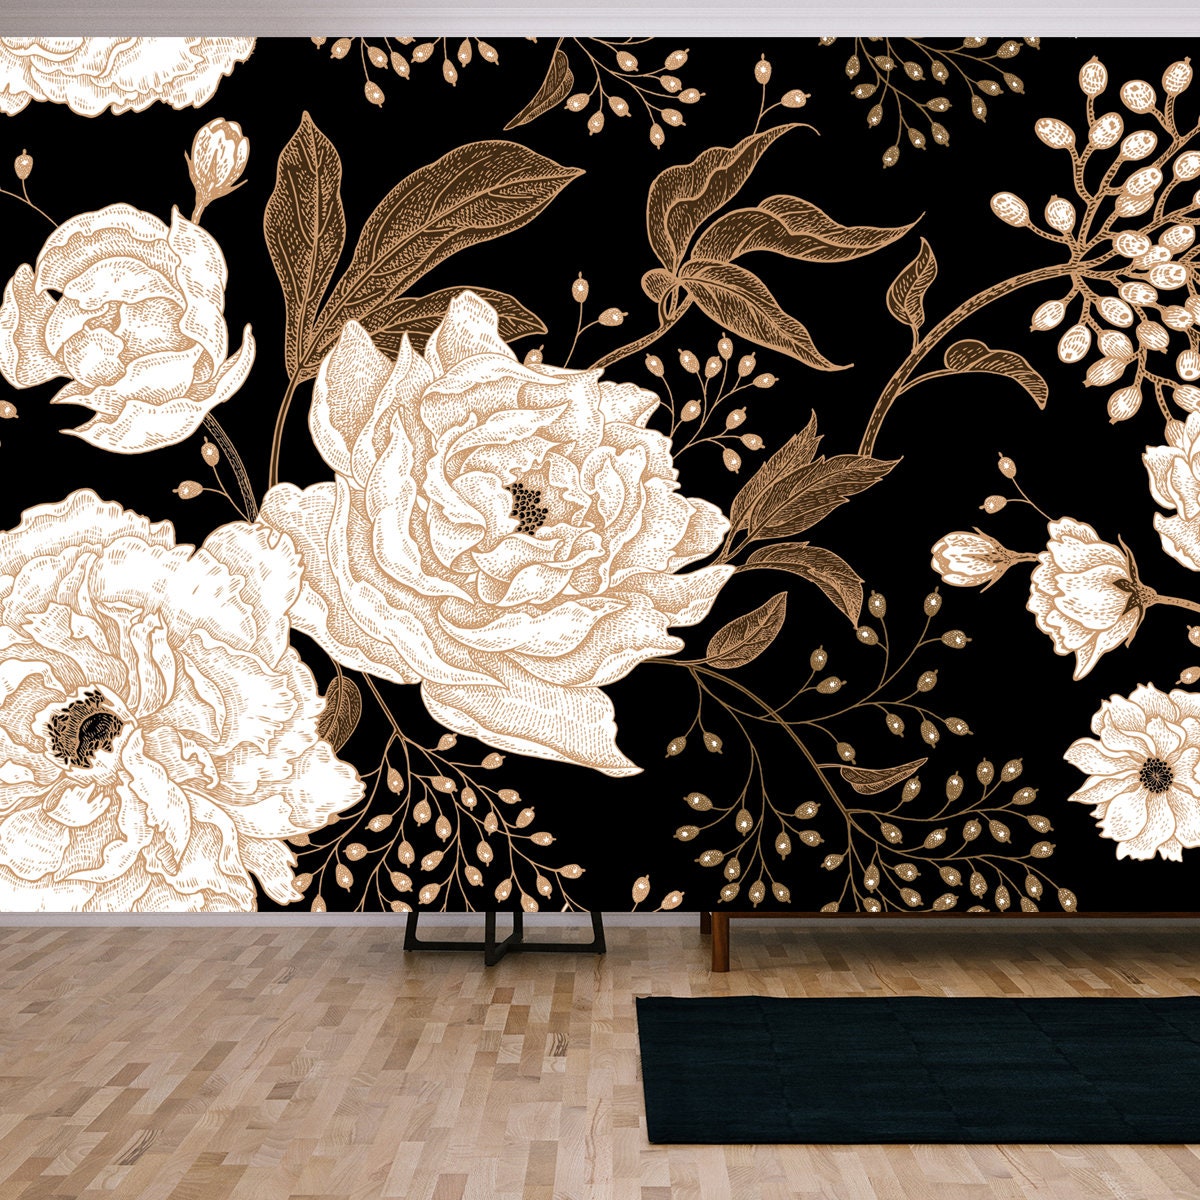 Peonies and Roses. Floral Vintage Seamless Pattern. Gold and White Flowers, Leaves, Branches and Berries Wallpaper Living Room Mural